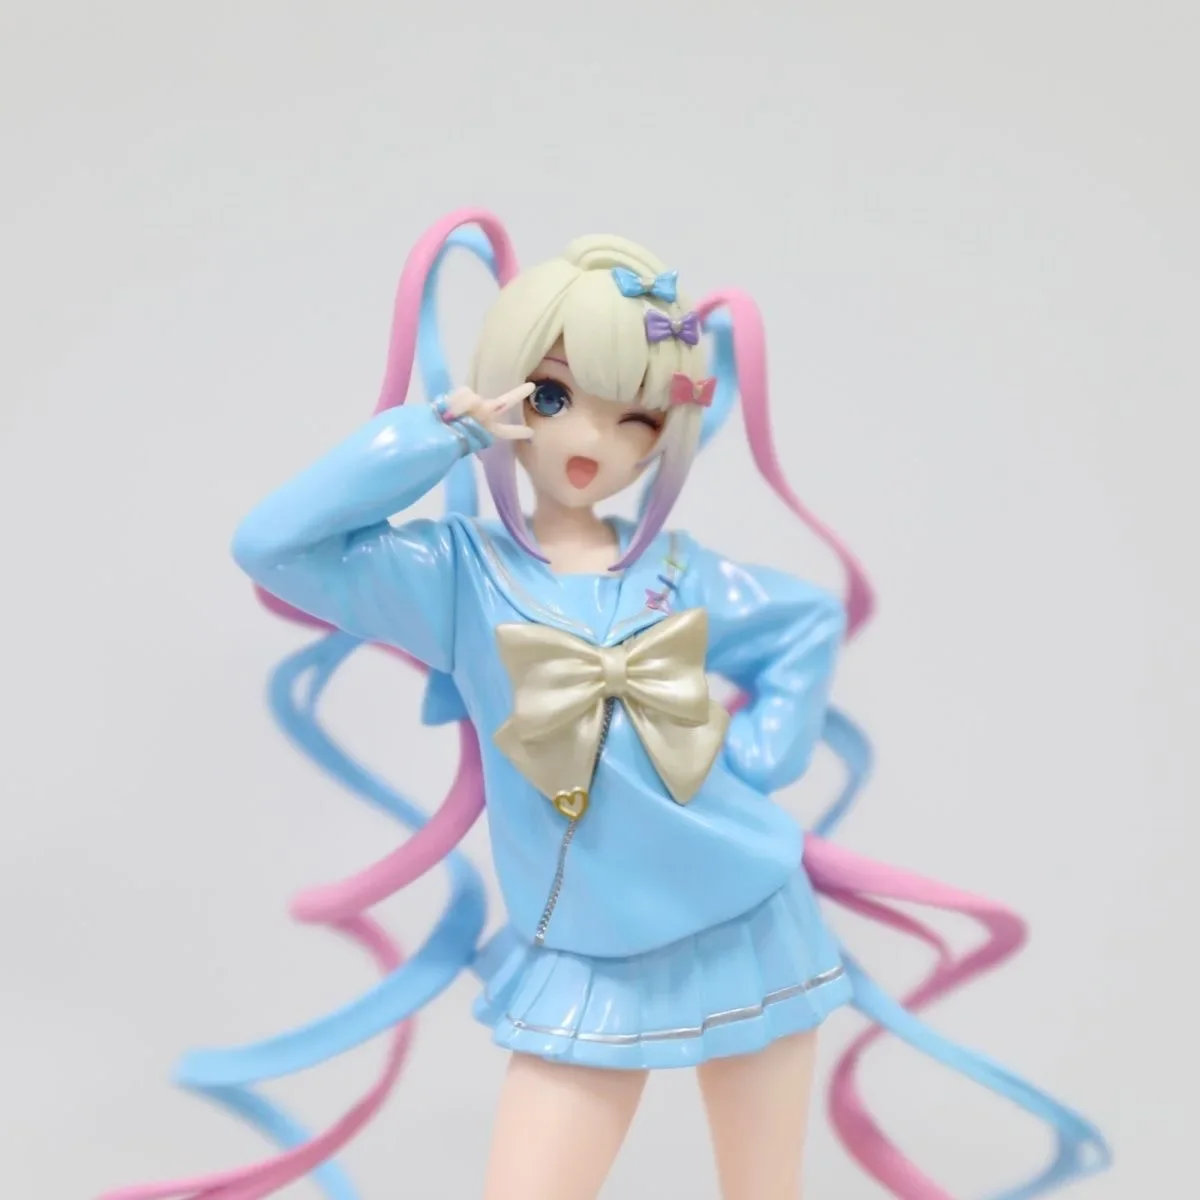 

Original Painting Series Native GSC Anchor Girl KAngel Figure 17cm PVC Cute Girl Model Adult Anime Action Model Doll Toy Gift